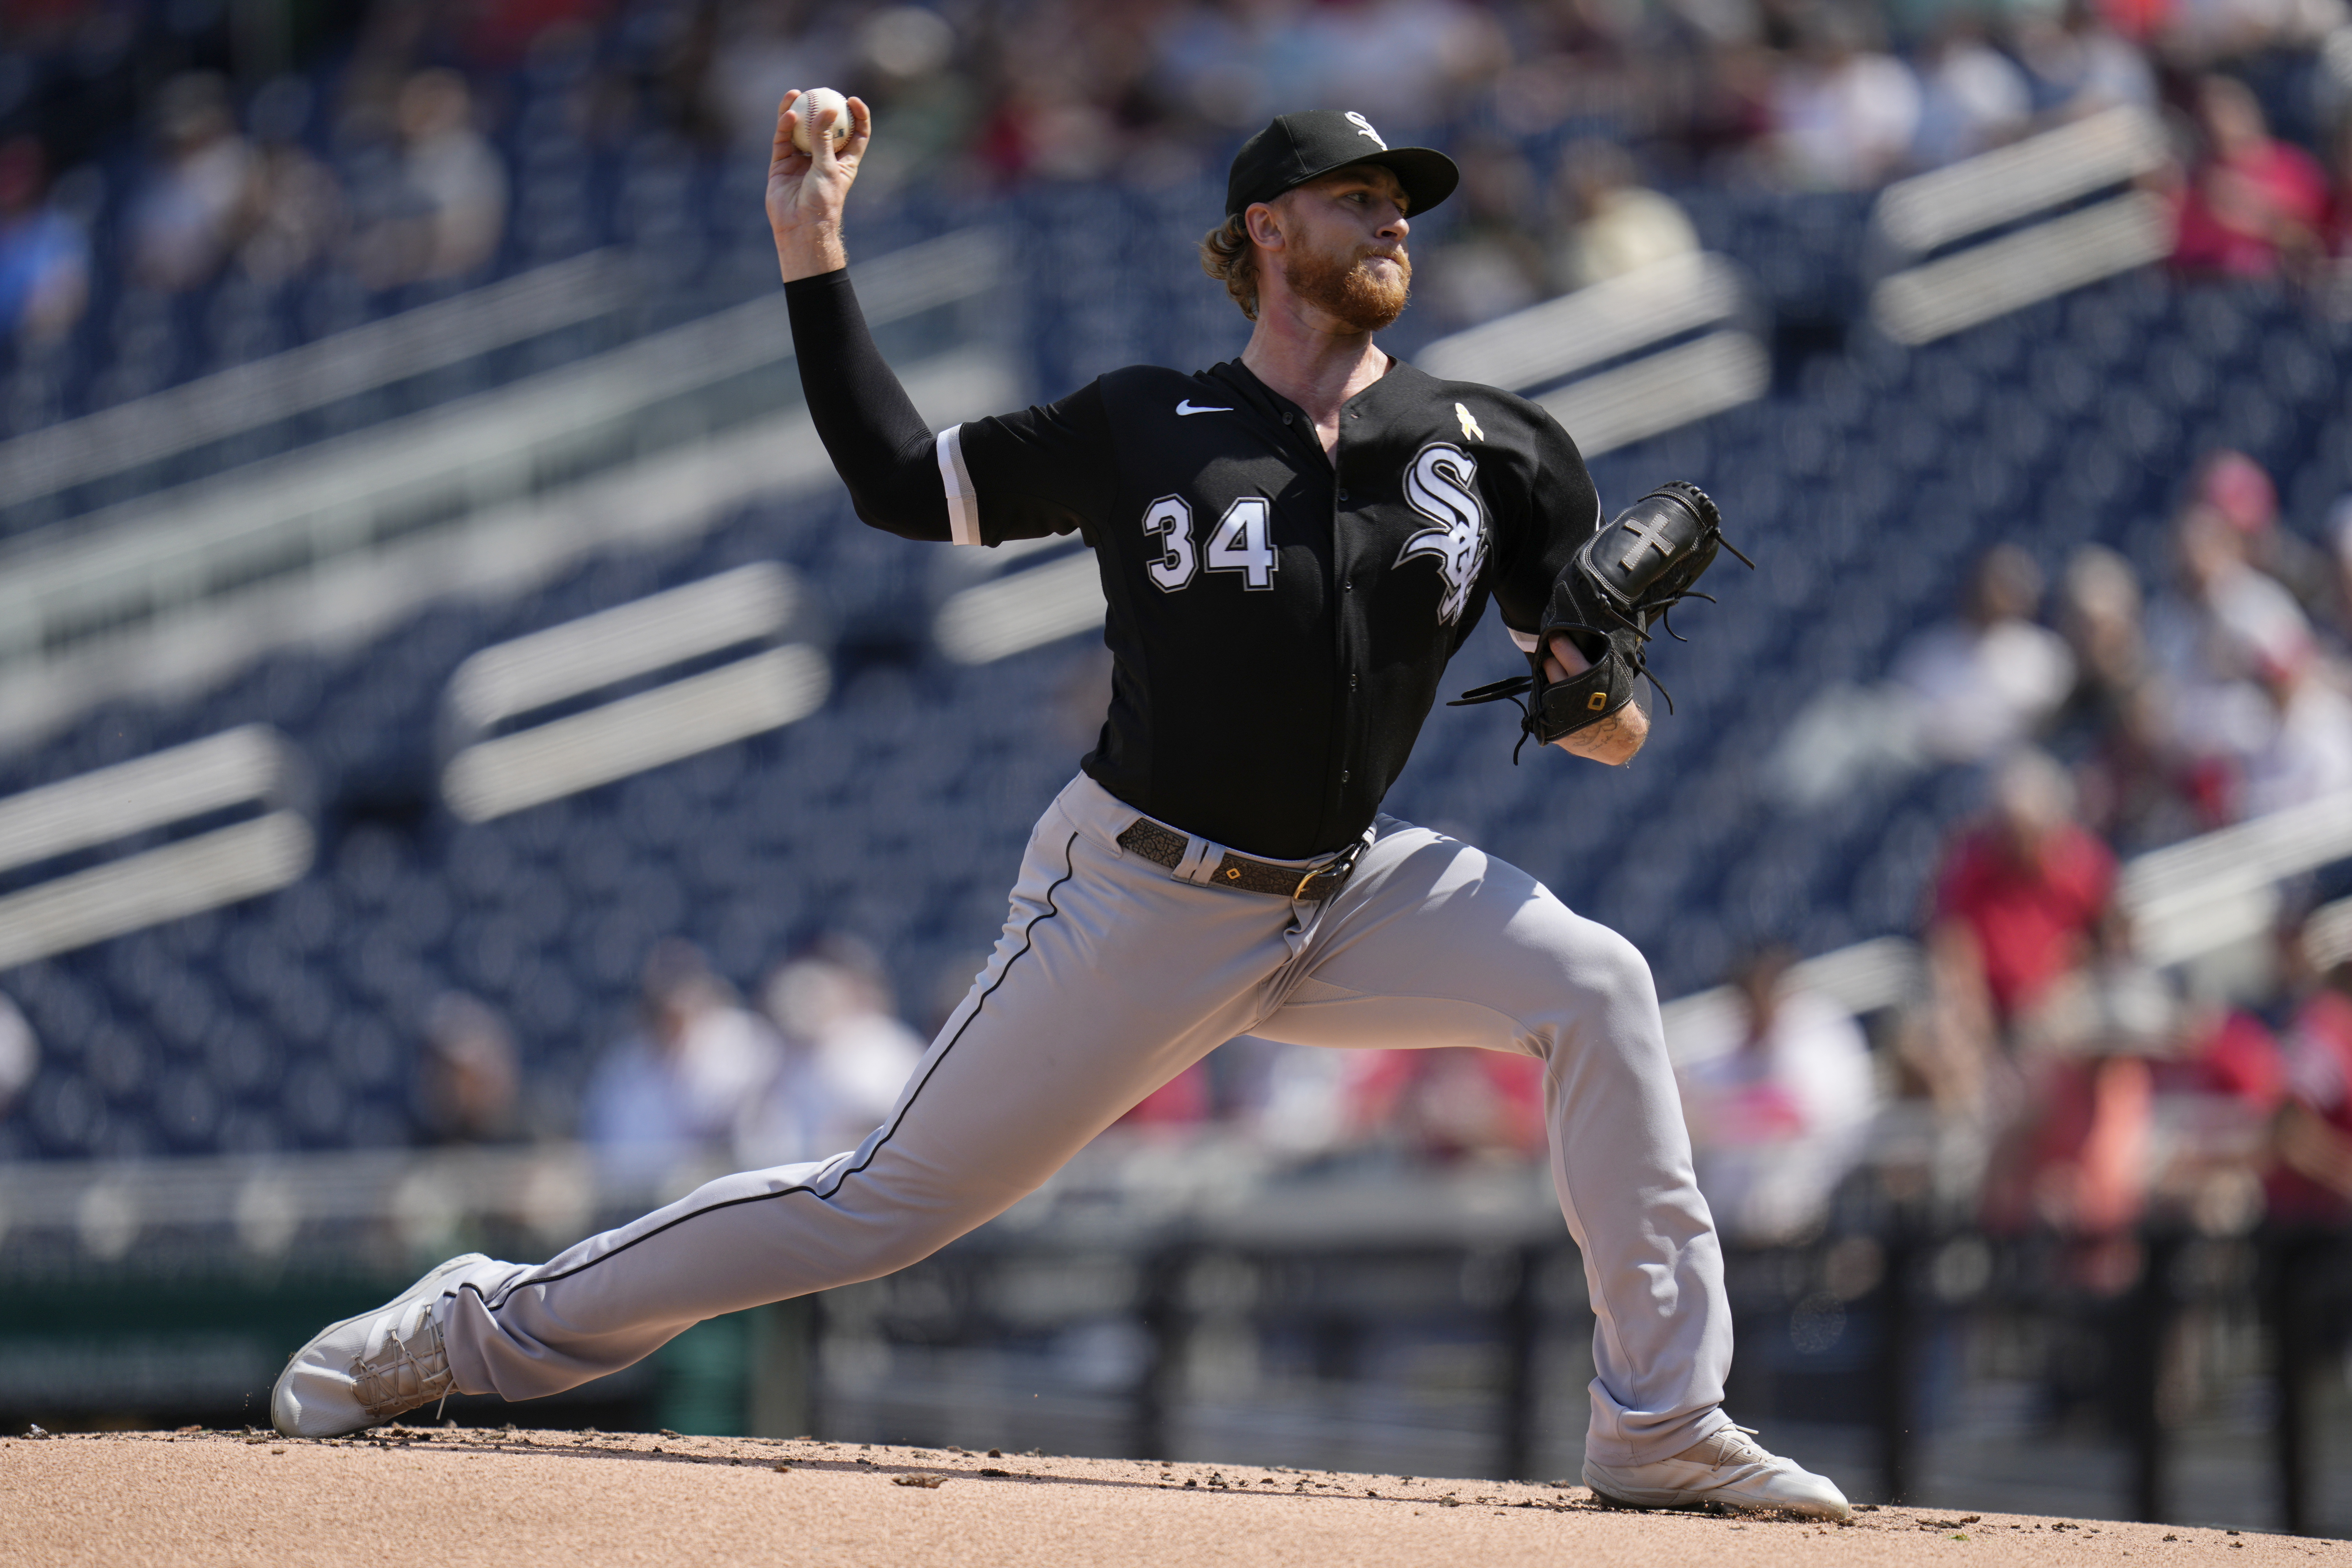 White Sox Send Pitcher Chris Sale Home for 'Clubhouse Incident' – NBC  Chicago